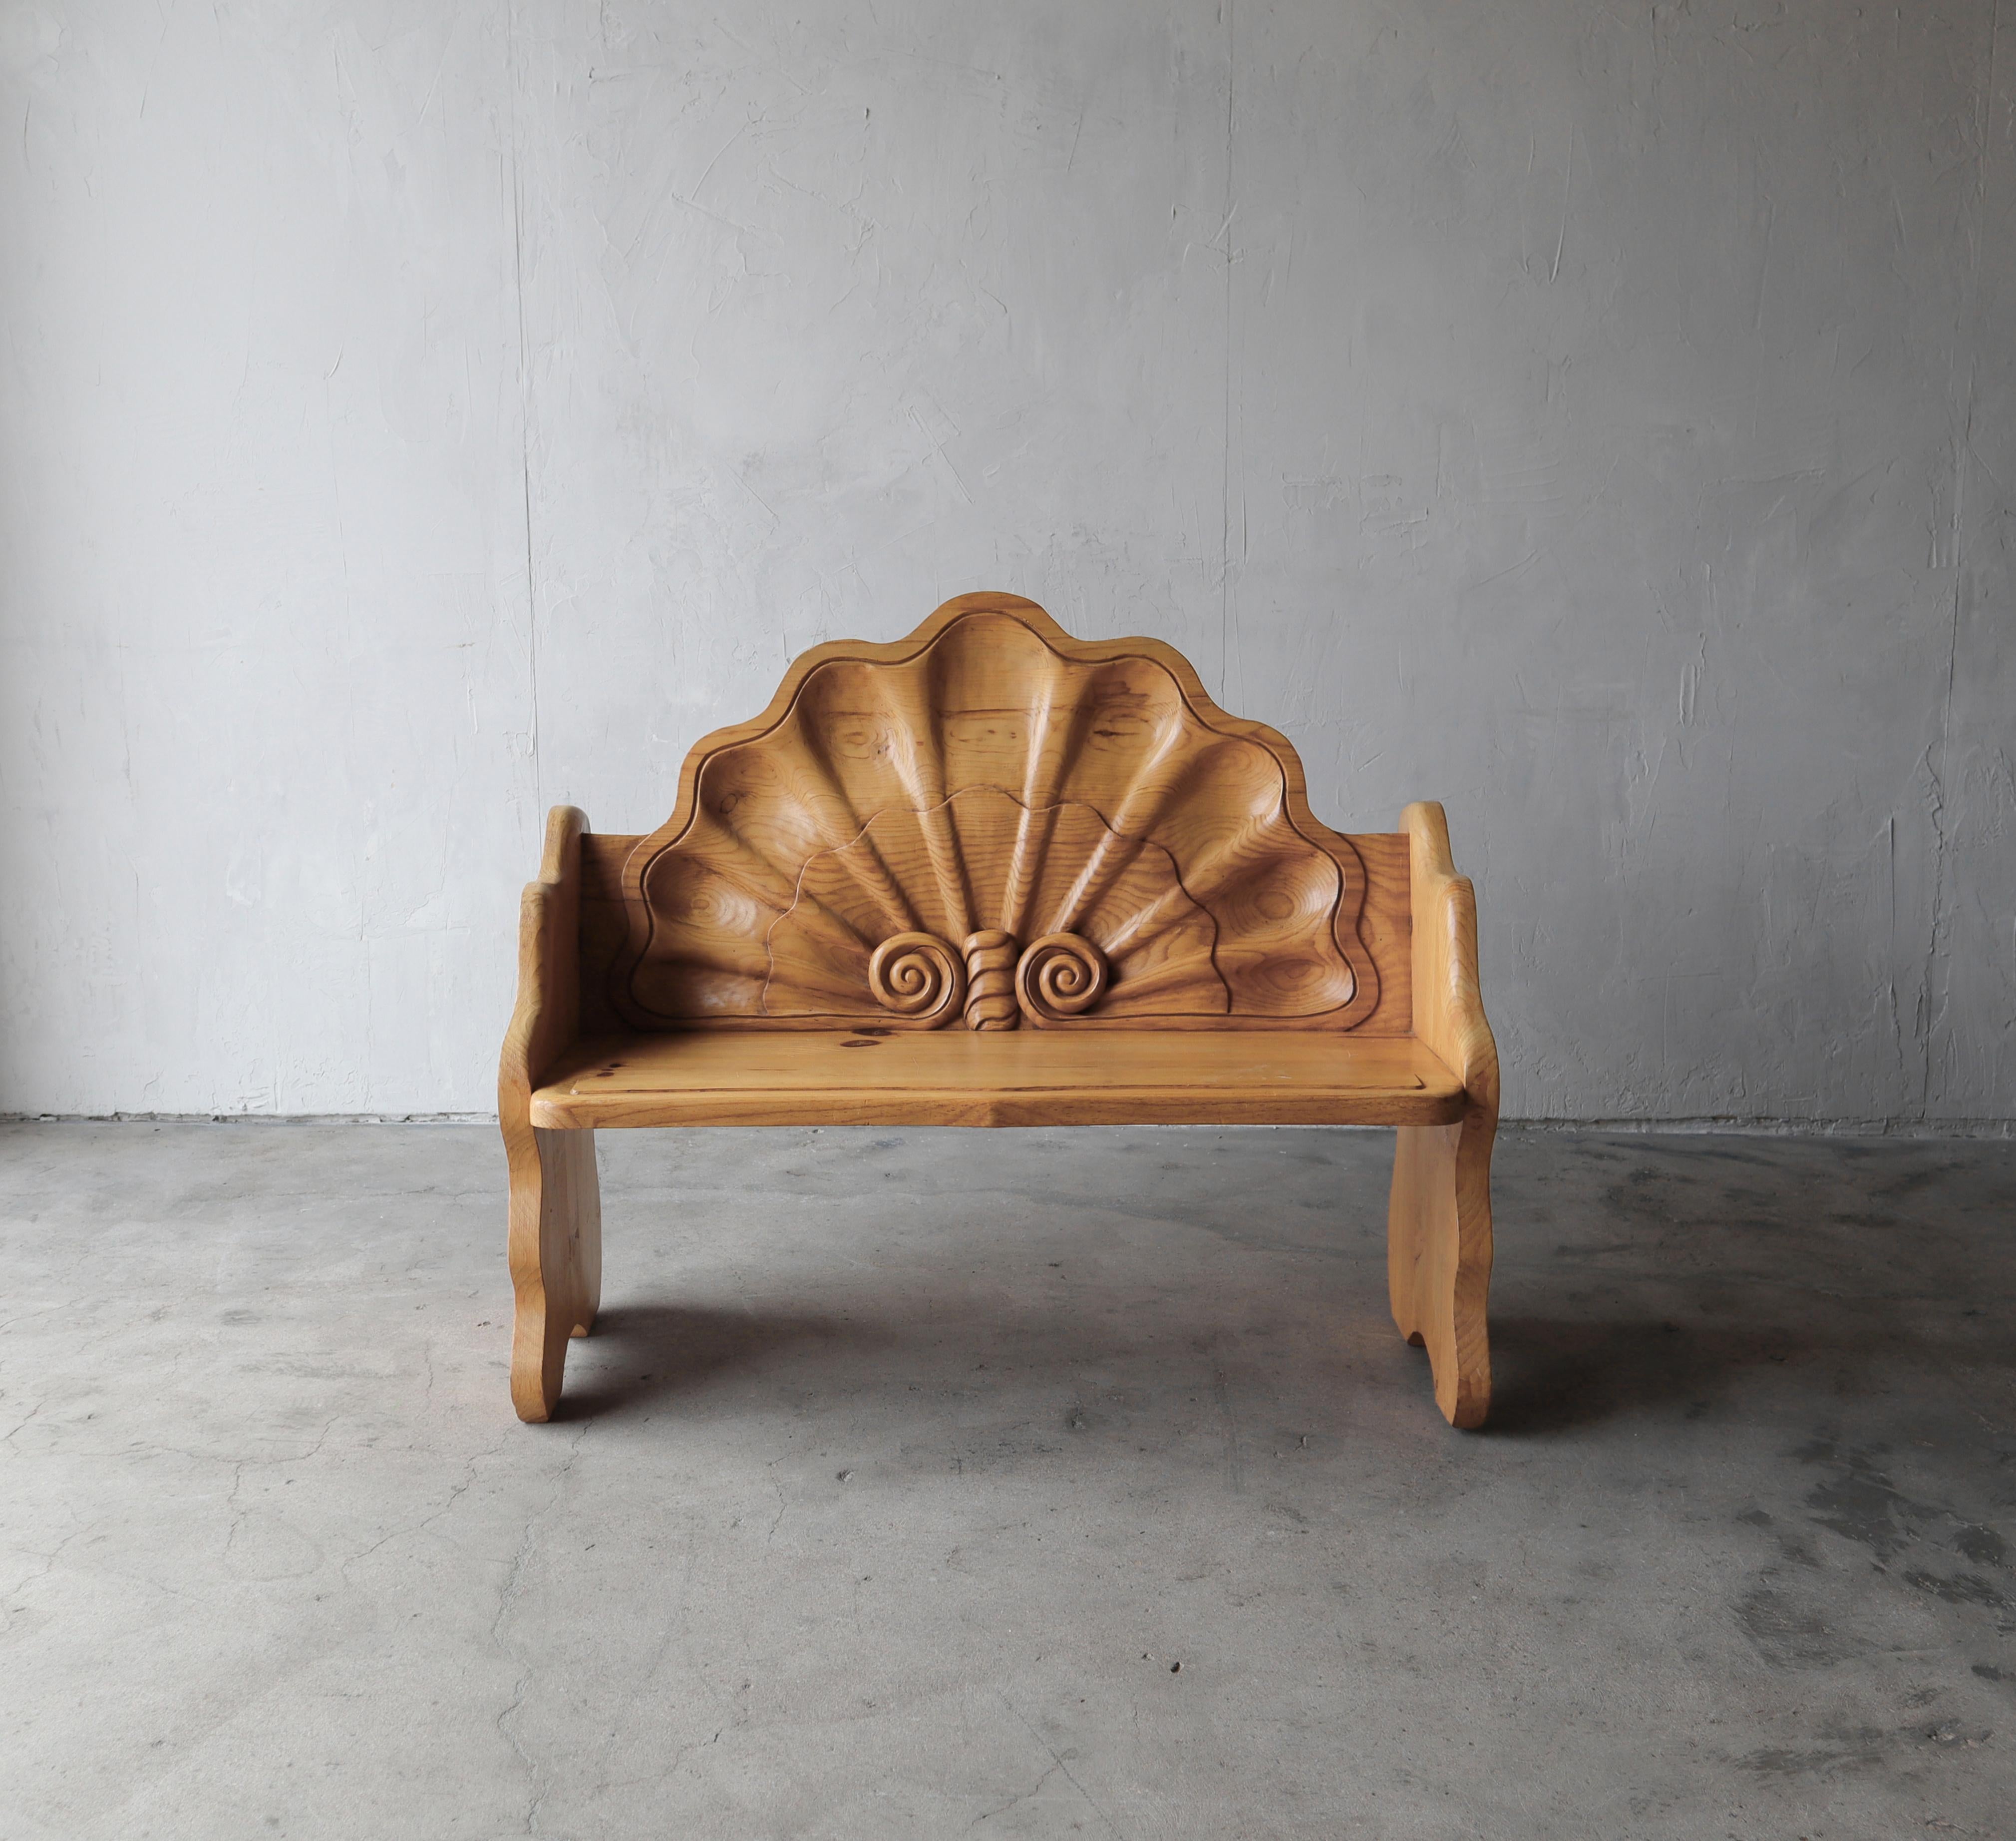 A true one of a kind piece, a conversation piece. Hand carved with no detail spared. If you're looking for a unique piece, something different, to put in a space that adds interest and function, look know further. This gorgeous bench is true art but